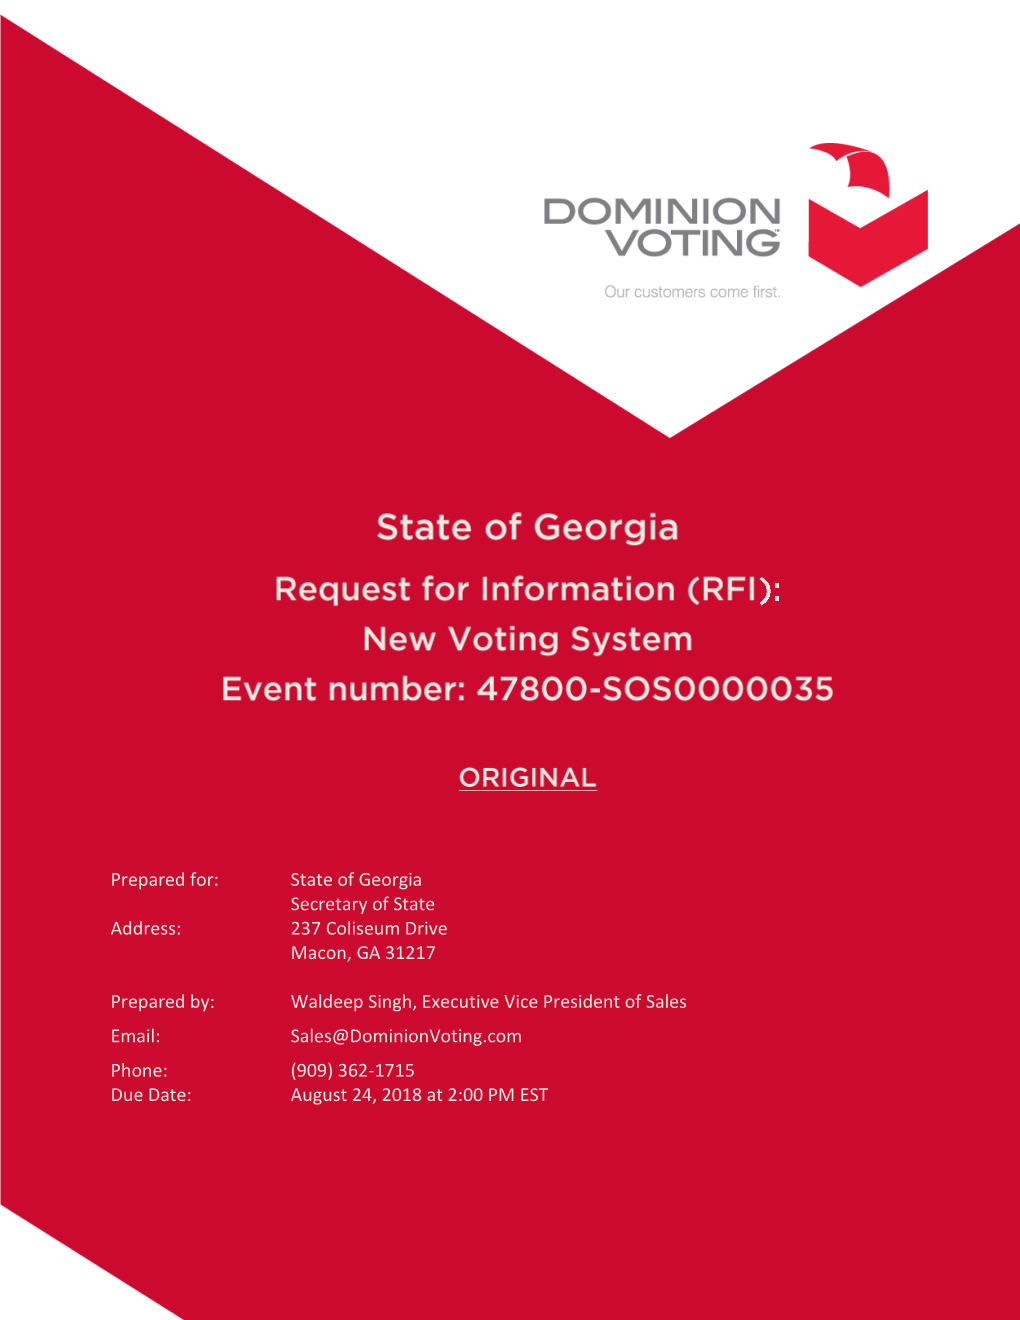 Dominion Voting Systems, Inc